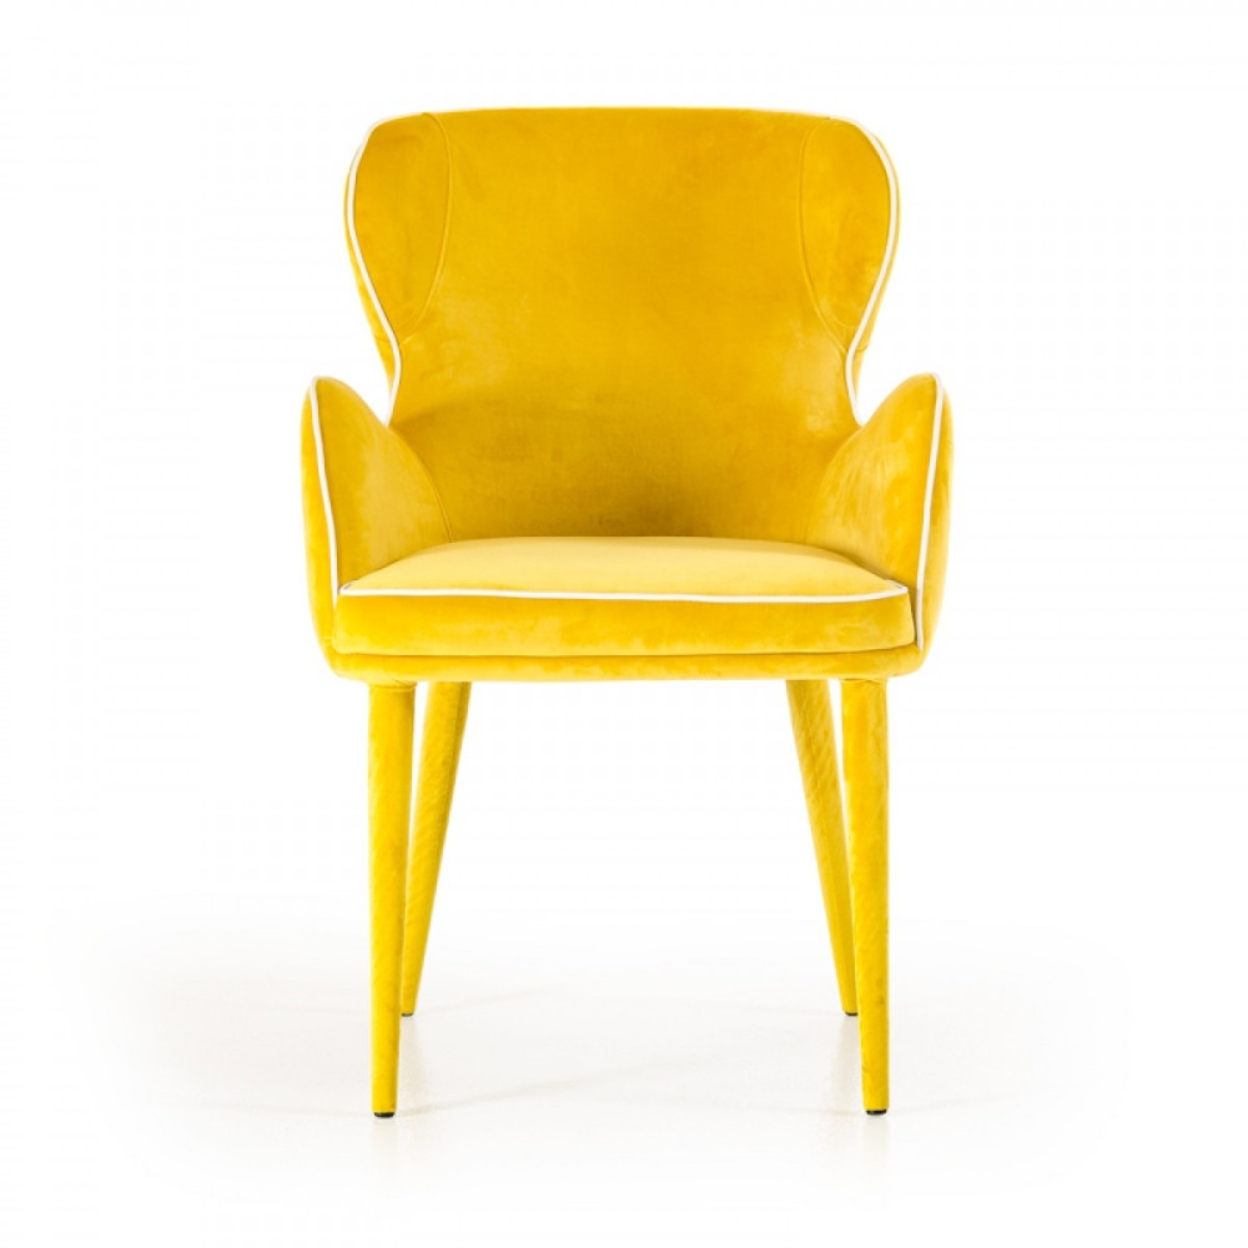 Fabric Upholstered Wing Back Design Dining Chair With High Curvy Arms, Yellow- Saltoro Sherpi